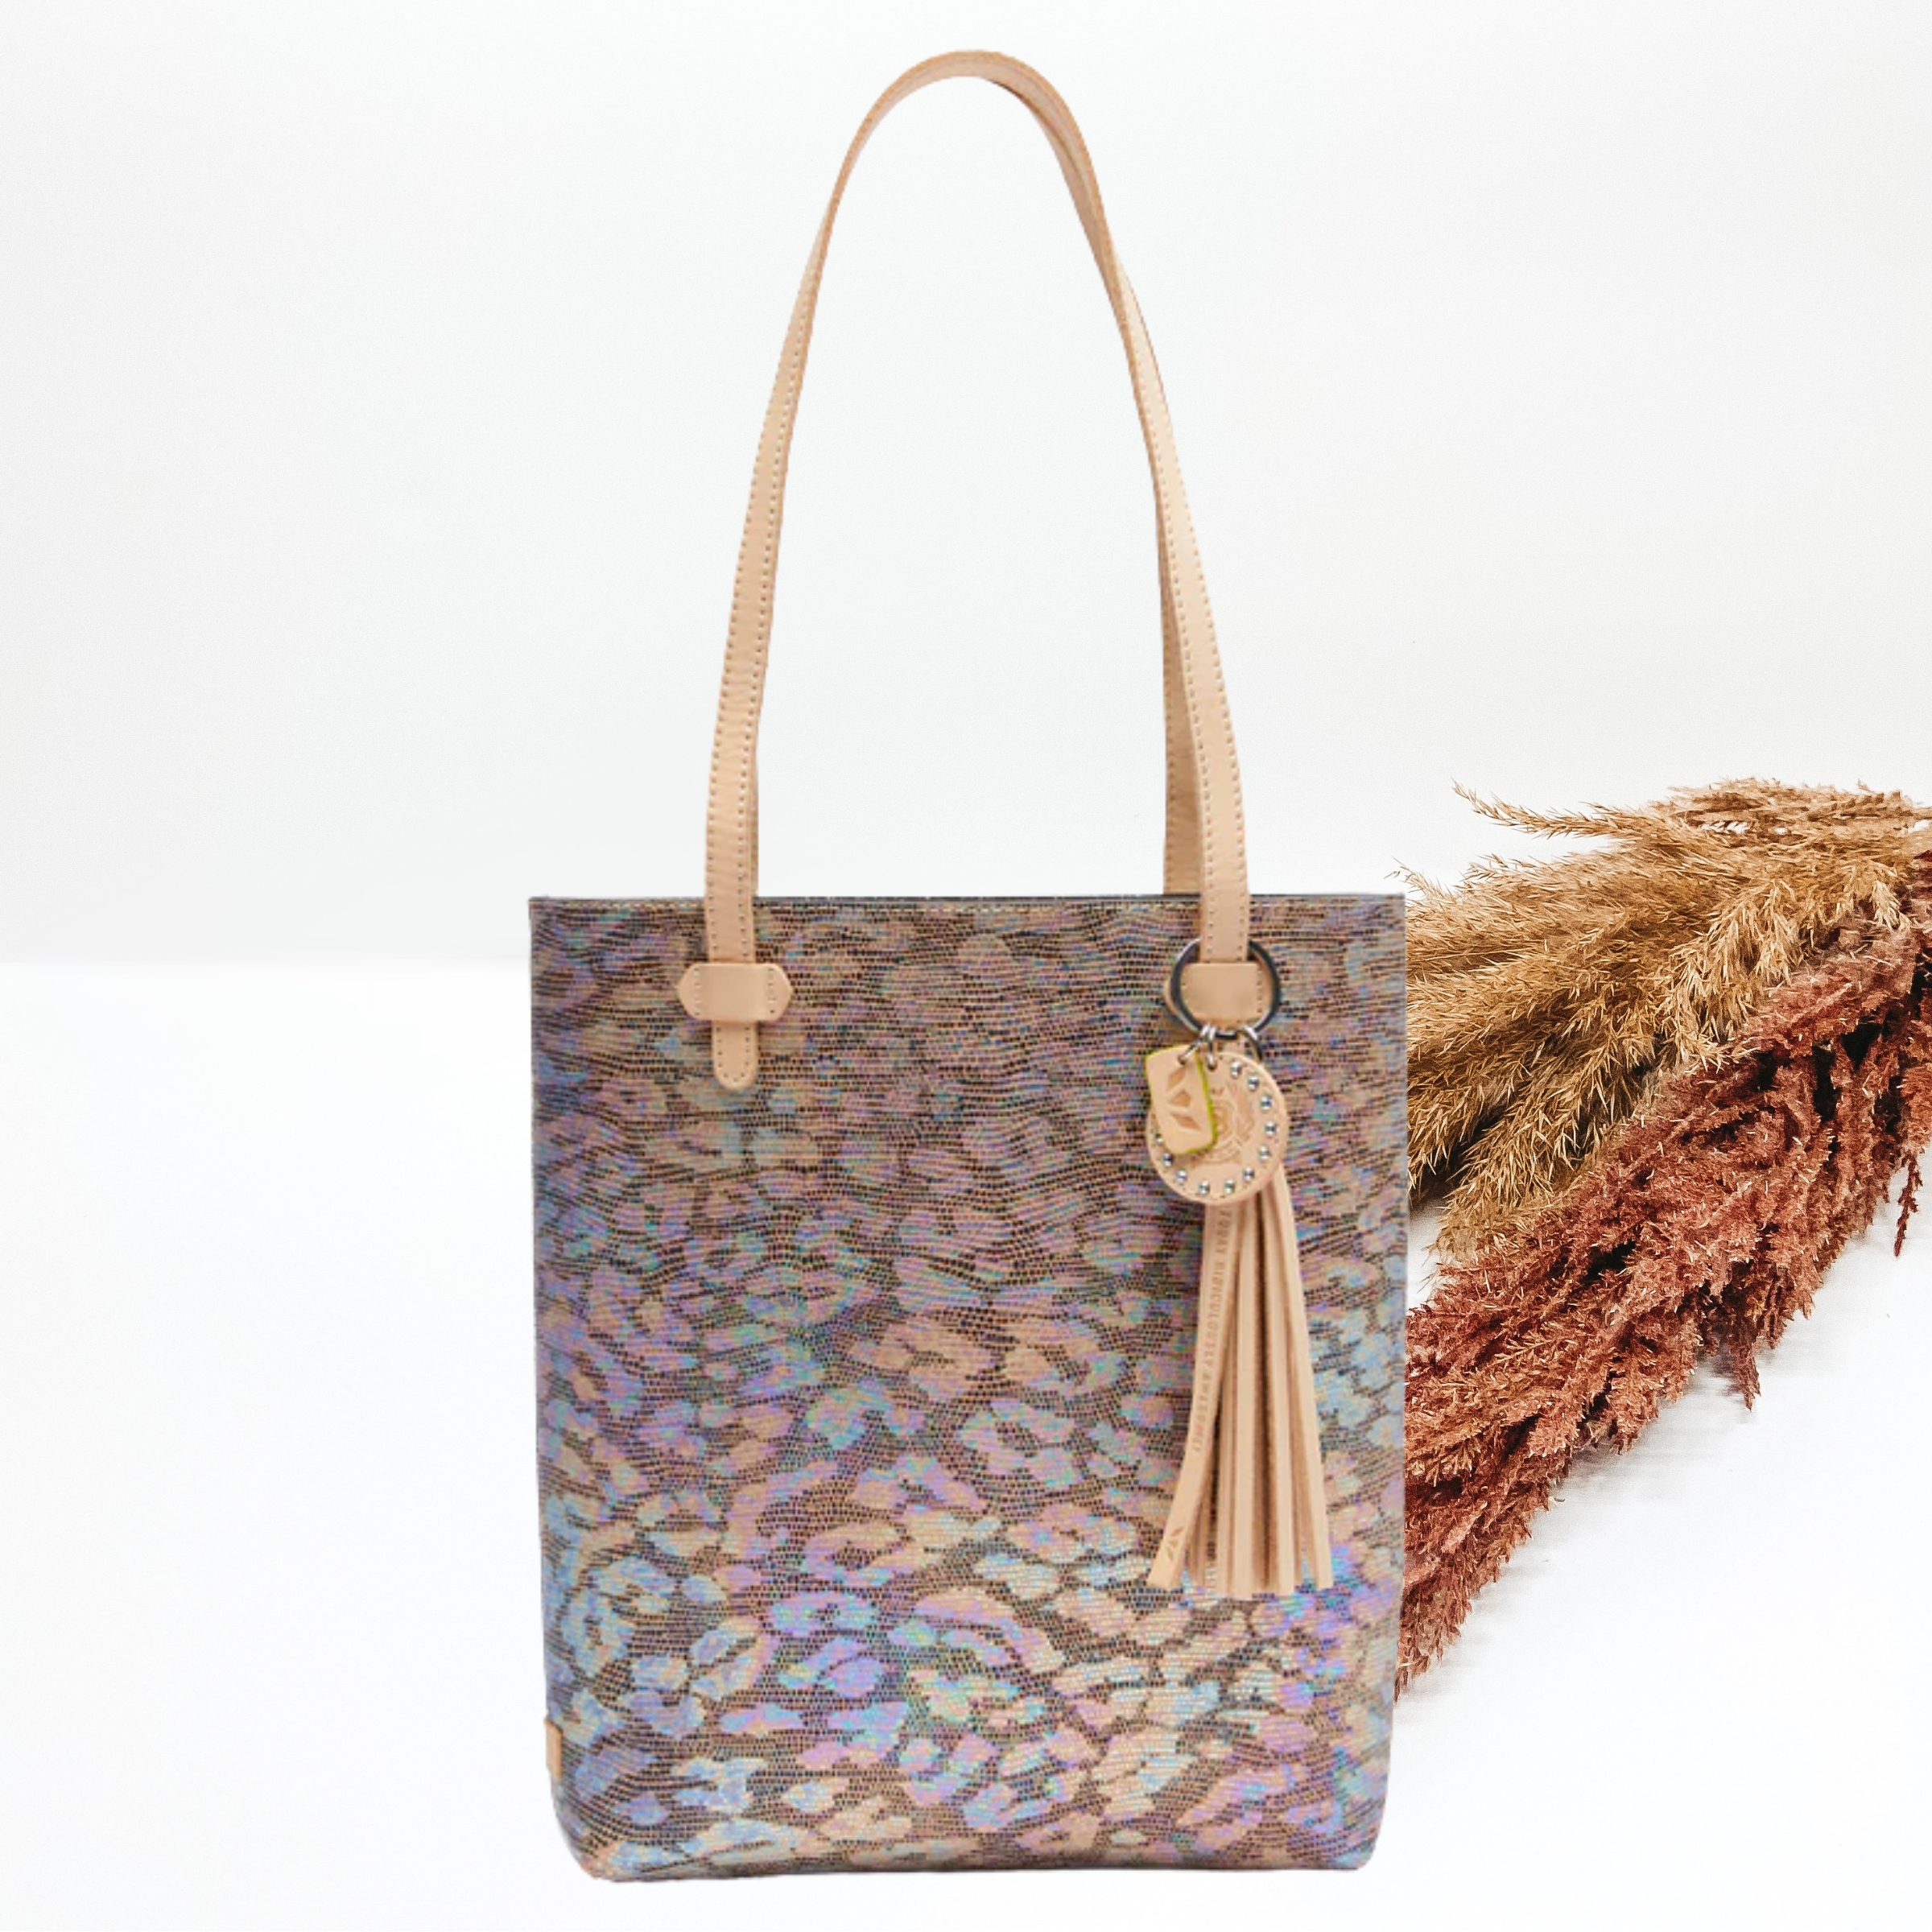 Pictured is long, rectangle tote that has a metallic, multicolored leopard print design. This purse also includes light tan, leather straps. This purse is pictured on a white background with pompous grass on the right side of the picture.